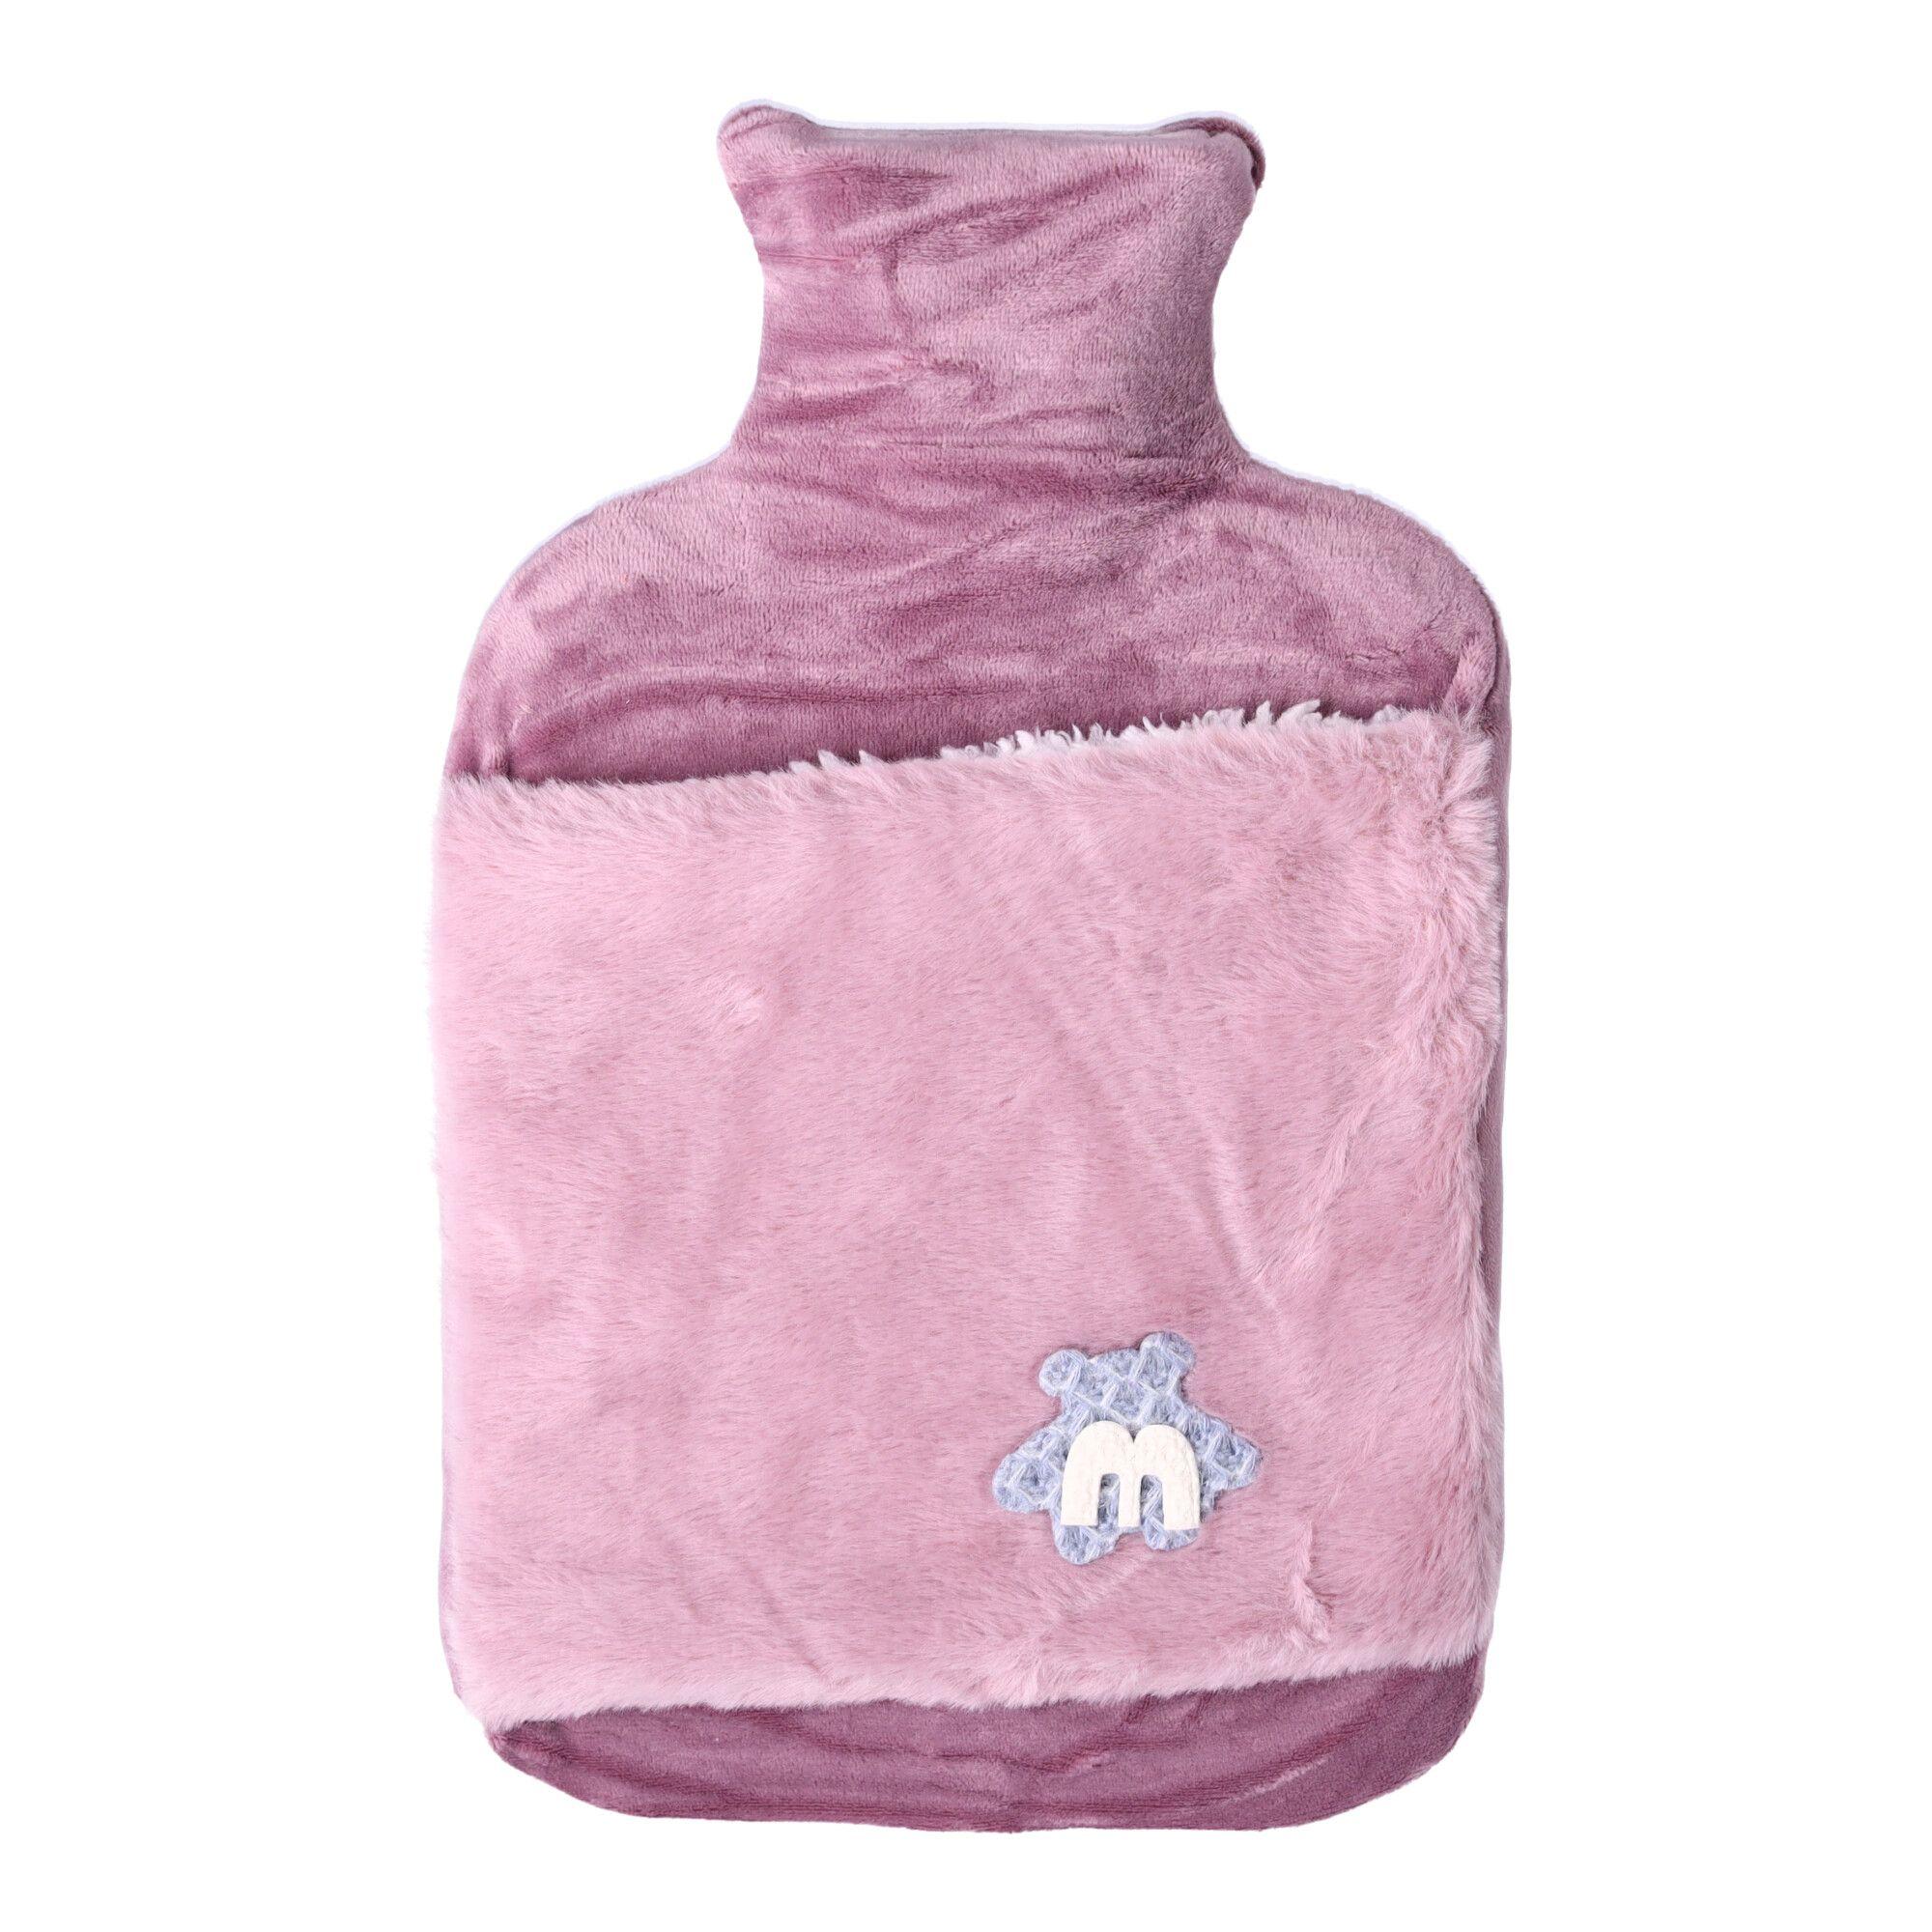 Plush hot water bottle, hot water bottle in a sweater 2L - pink, with a teddy bear